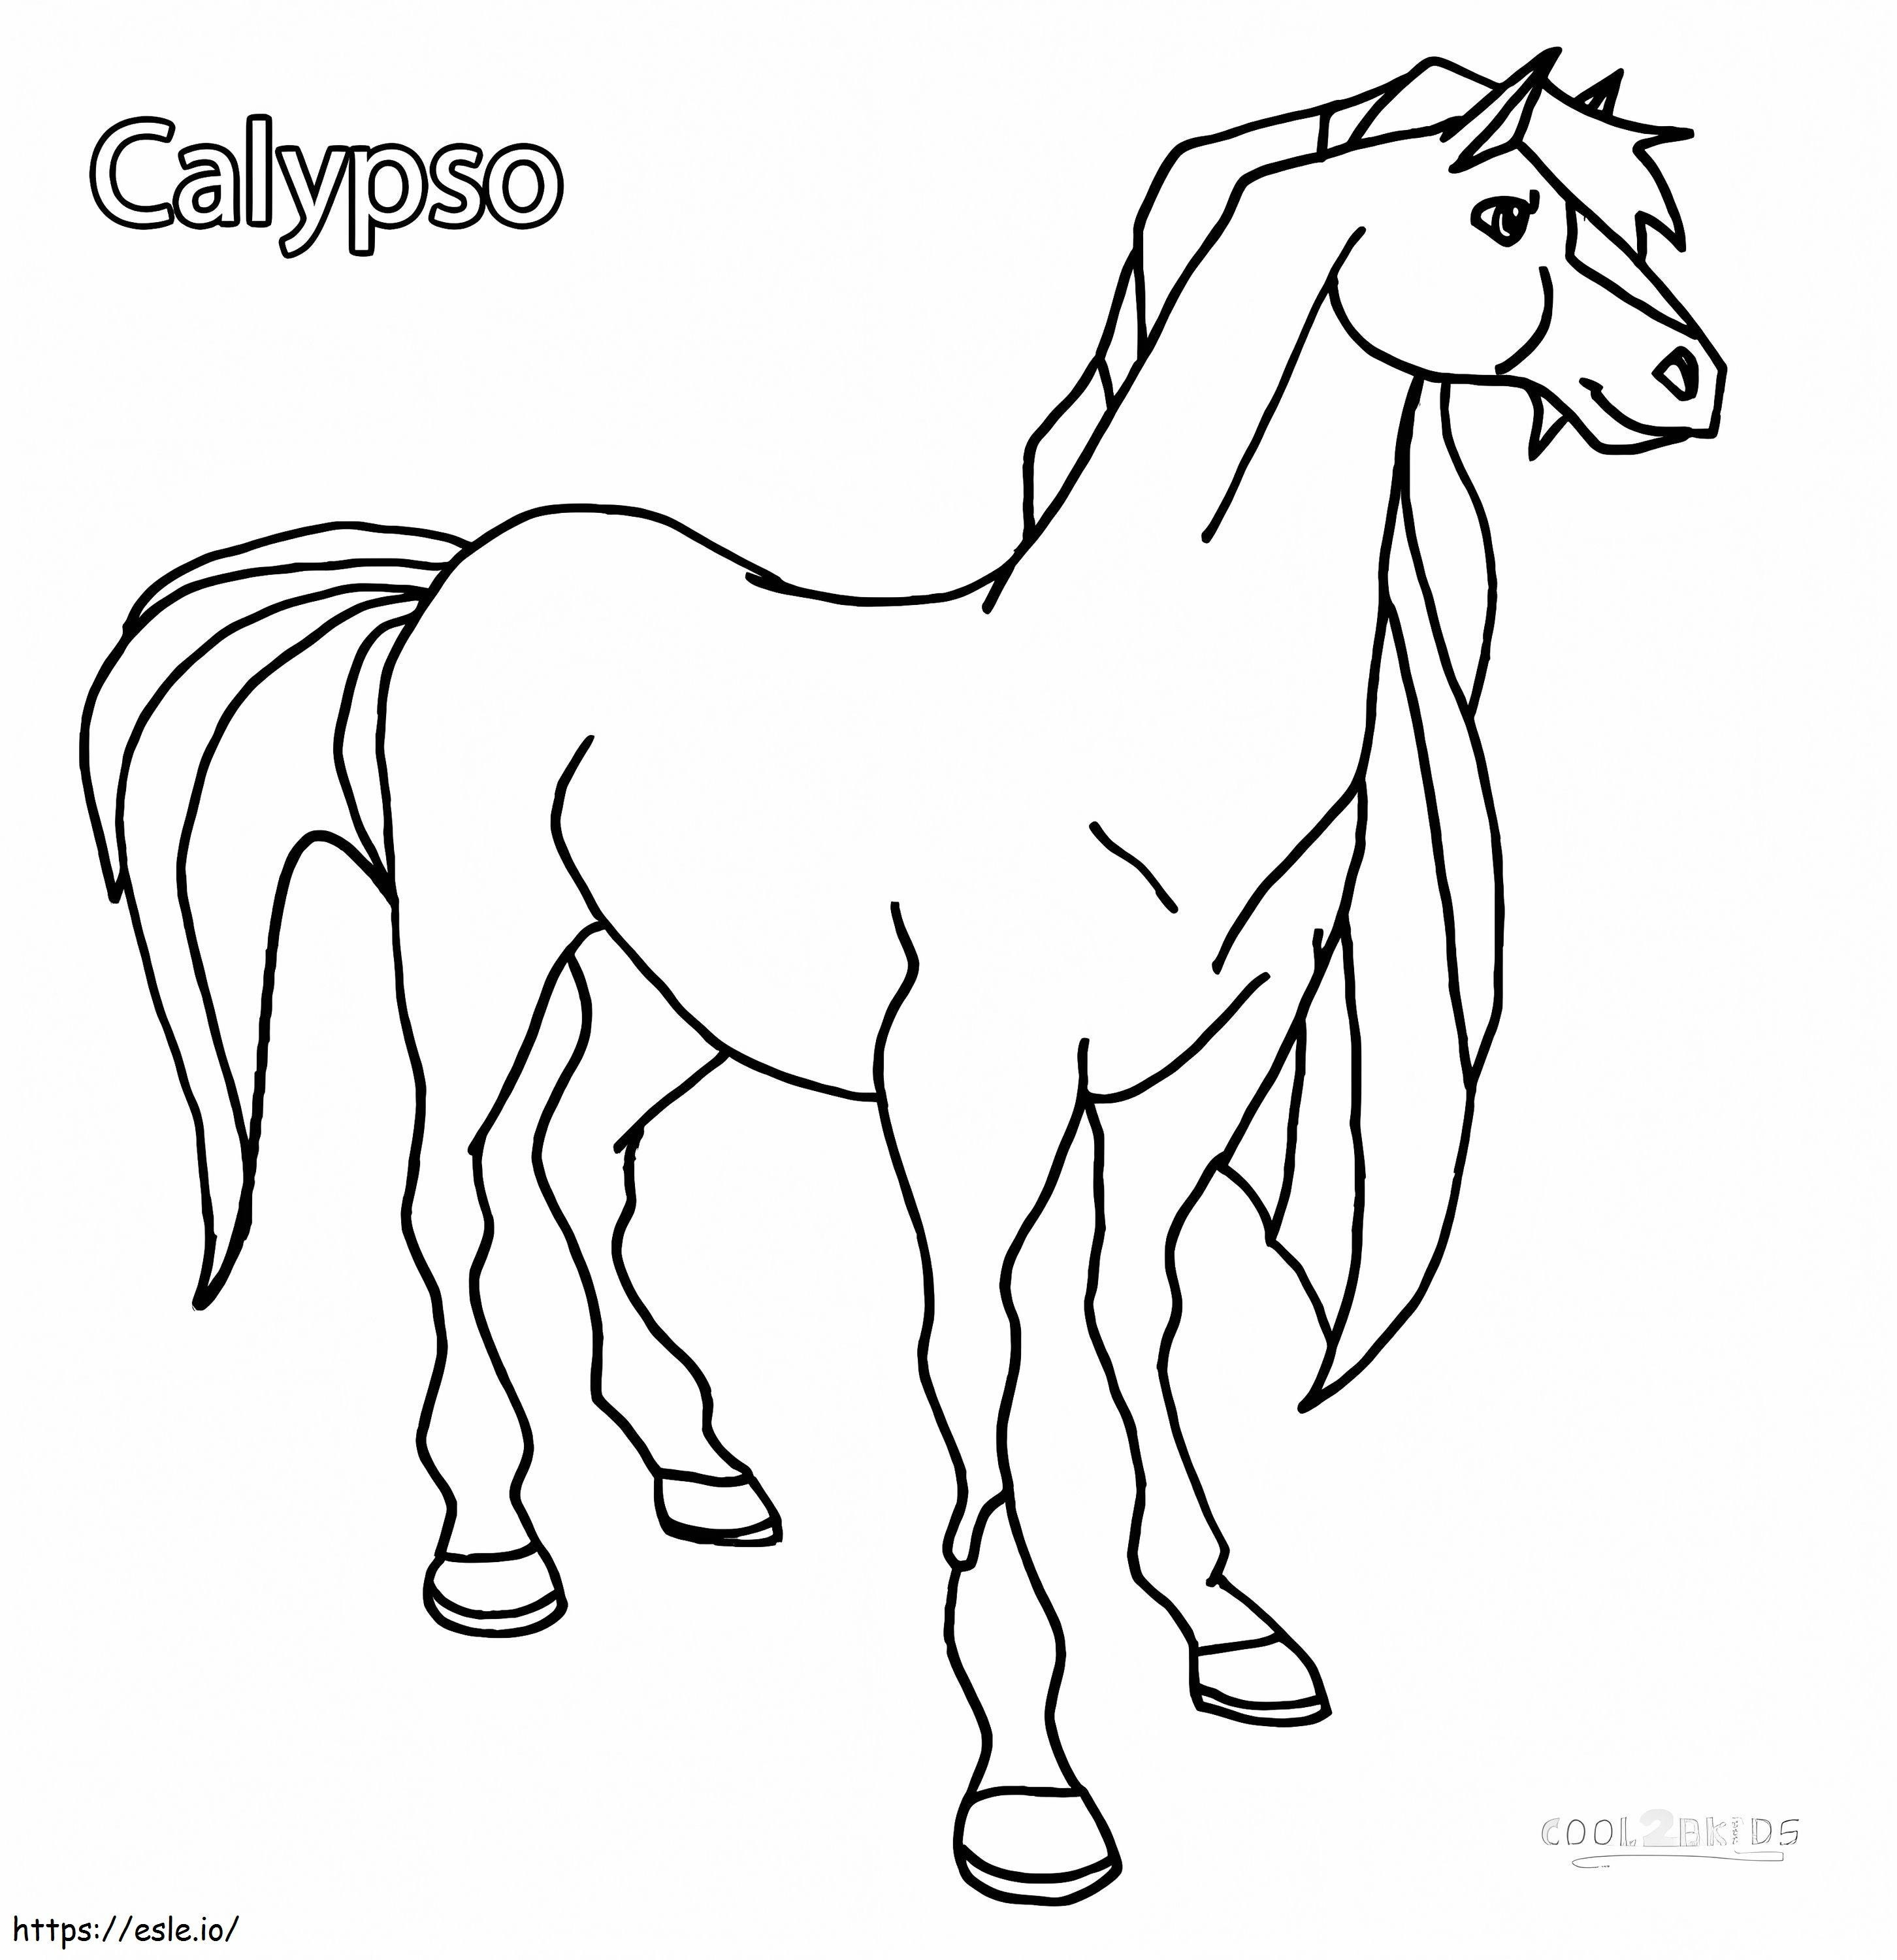 Calypso From Horseland coloring page